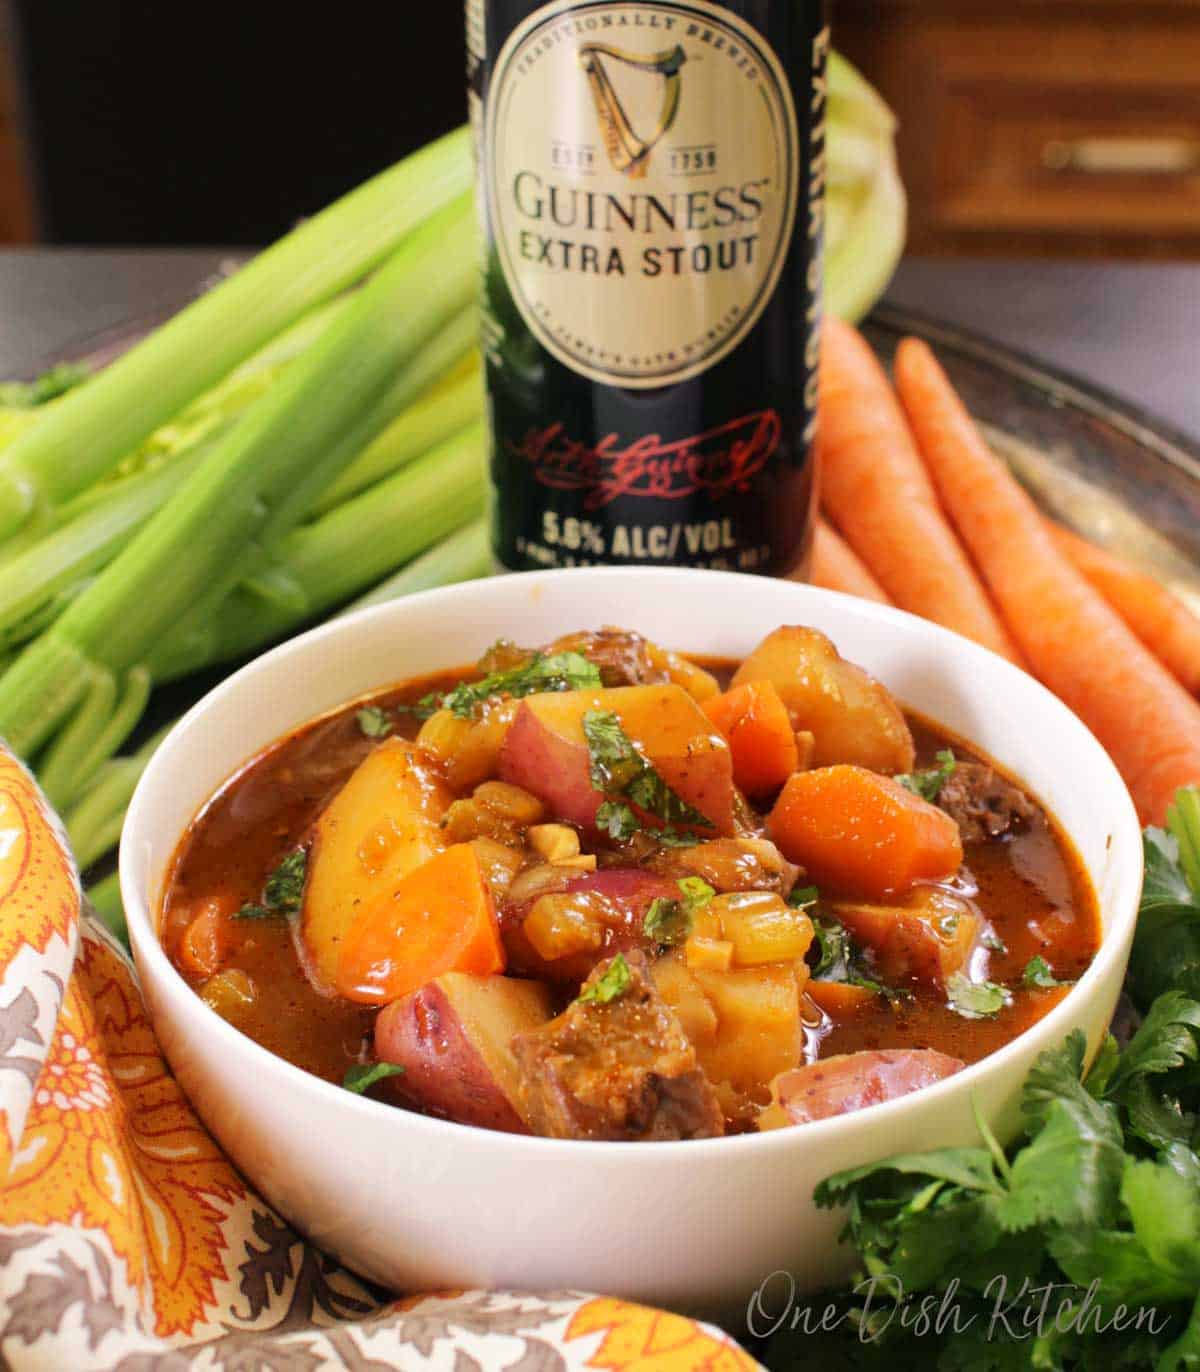 A bowl of irish stew with a can of guinness stout, carrots, and celery in the background.